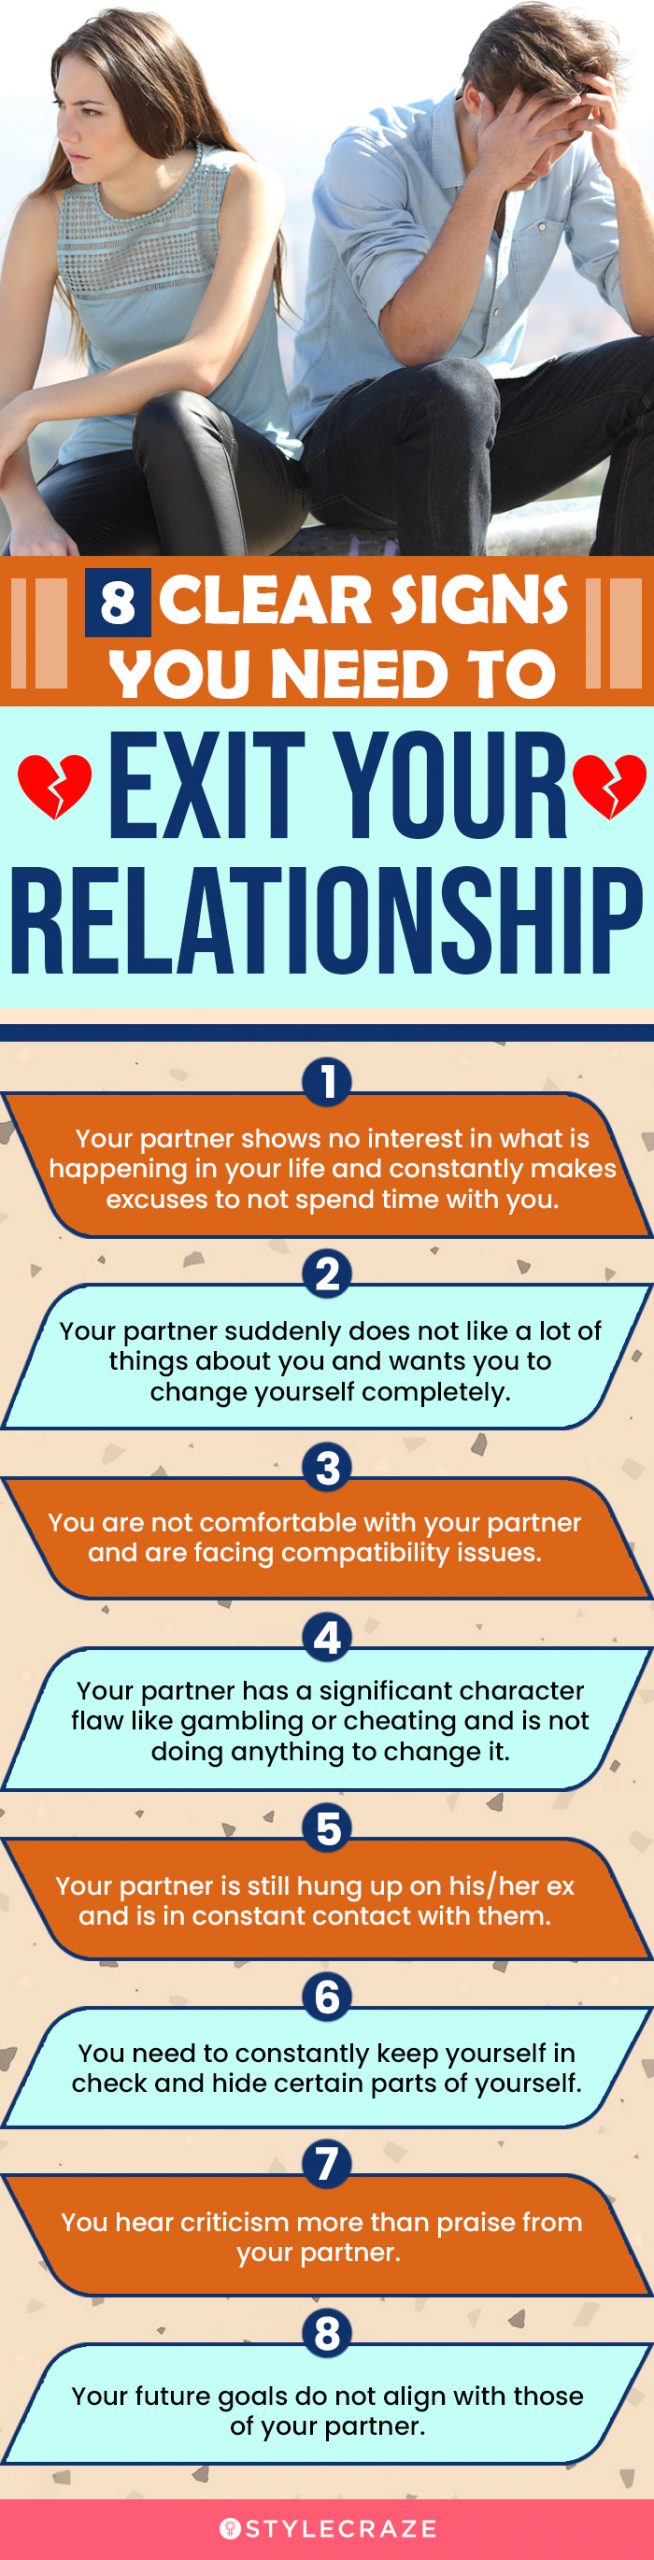 8 clear signs you need to exit your relationship (infographic)